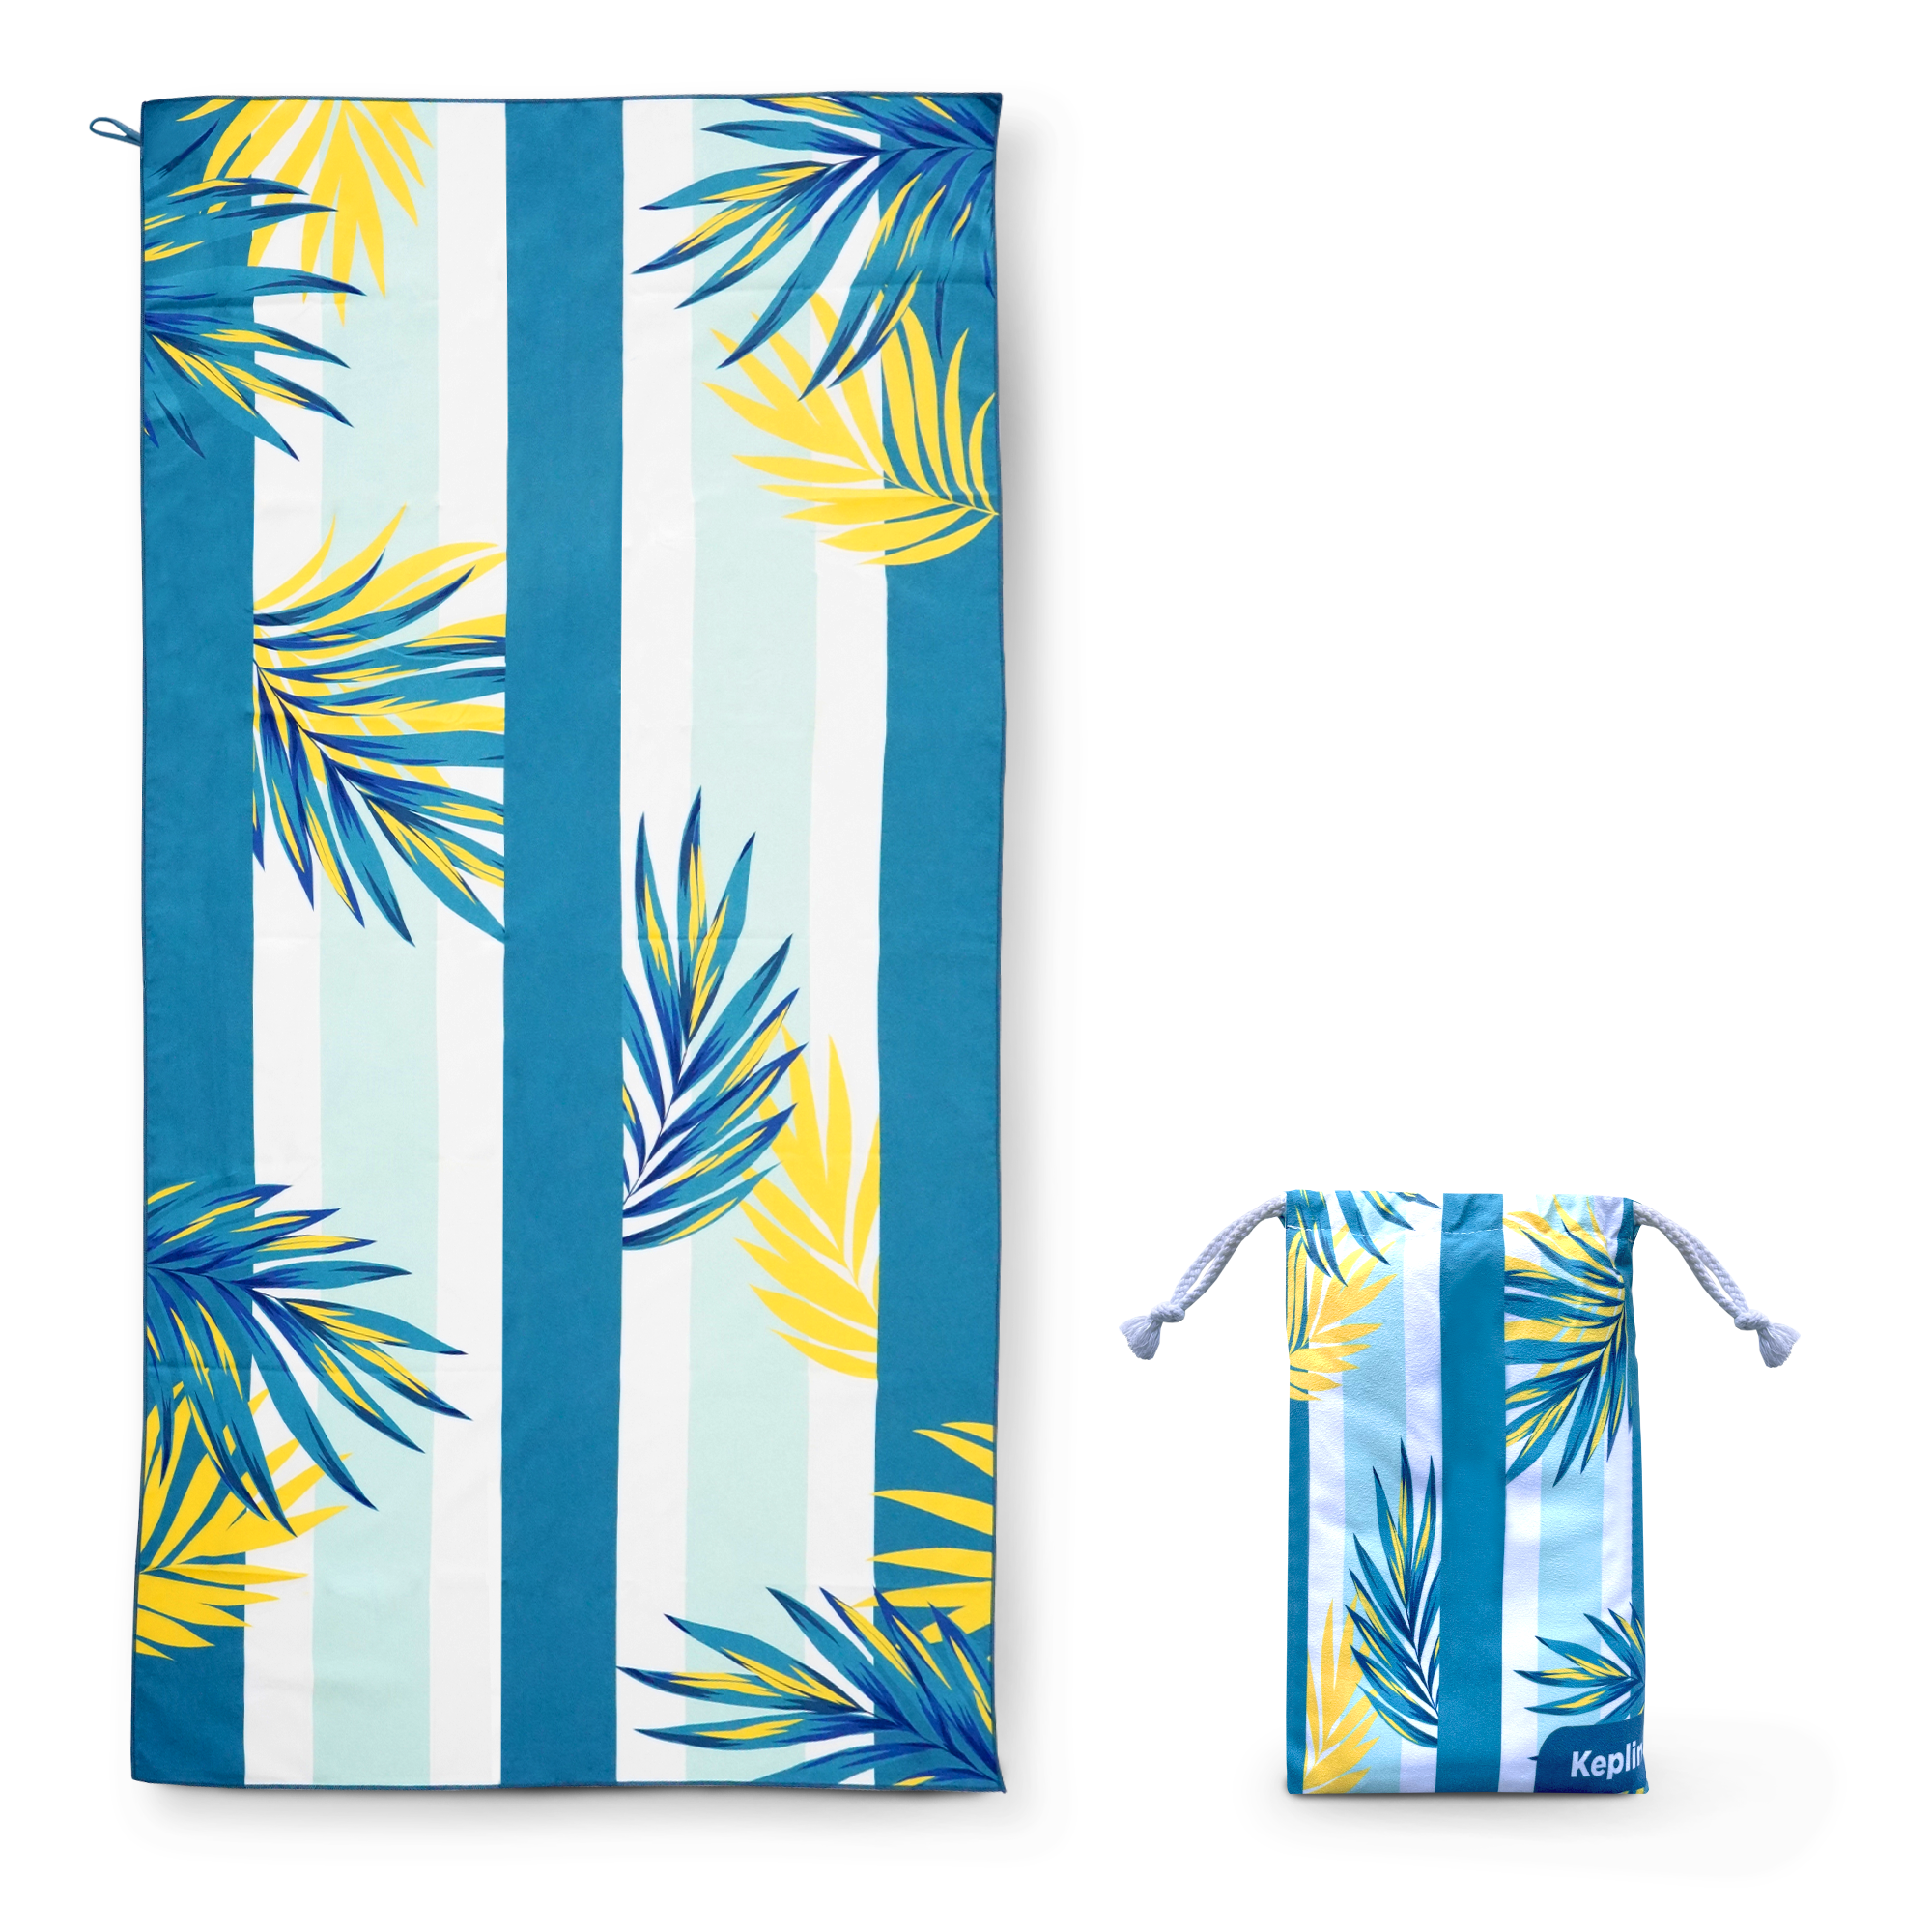 Microfibre Beach Towels for Adults & Kids - Absorbent and Fast Drying for Travel, Swimming Pool